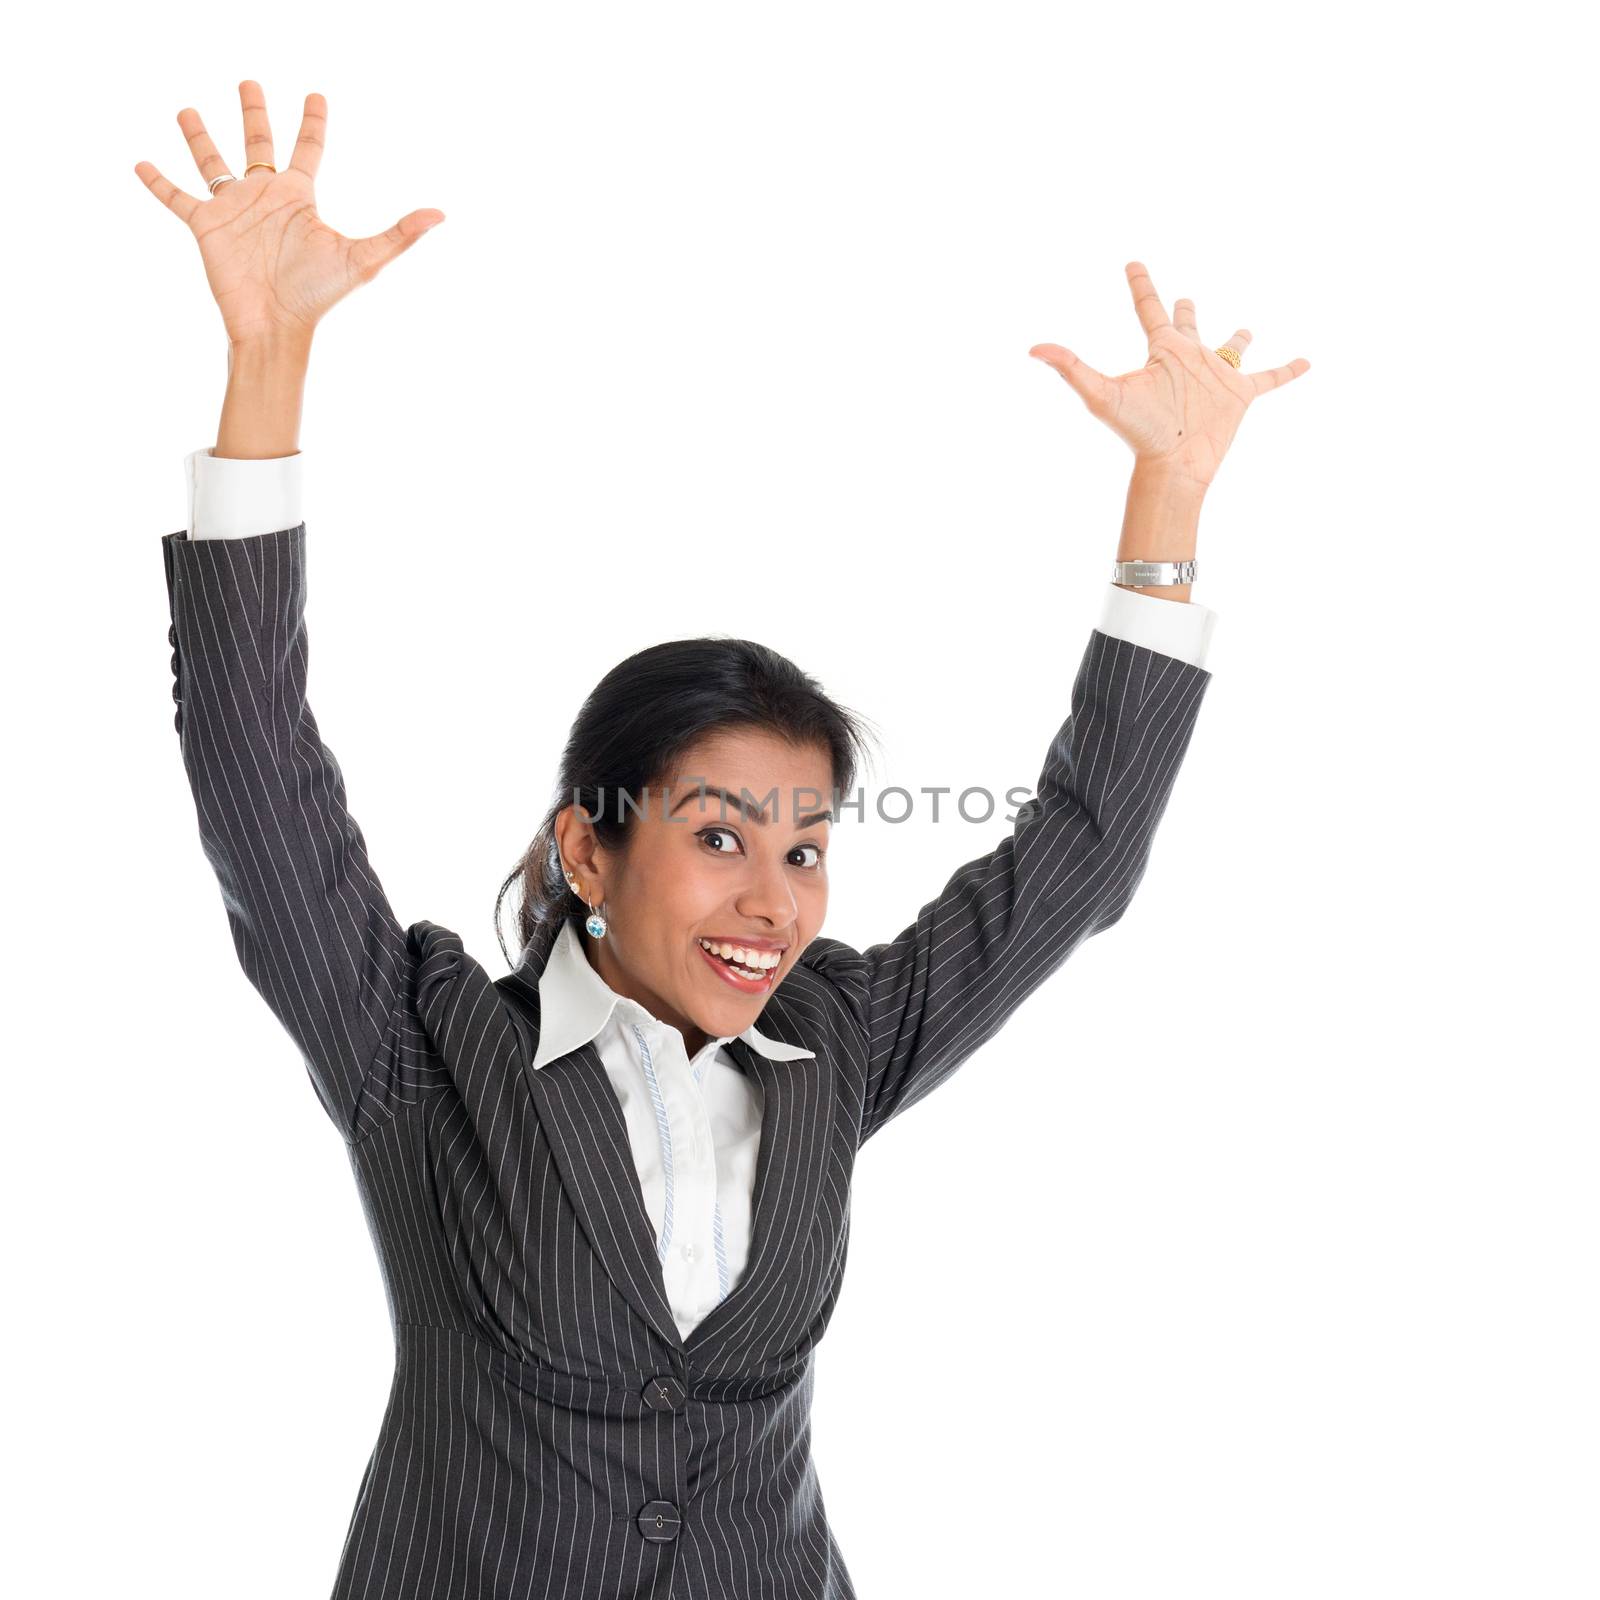 Portrait of black business woman in formalwear arms raised and smiling, isolated on white background.